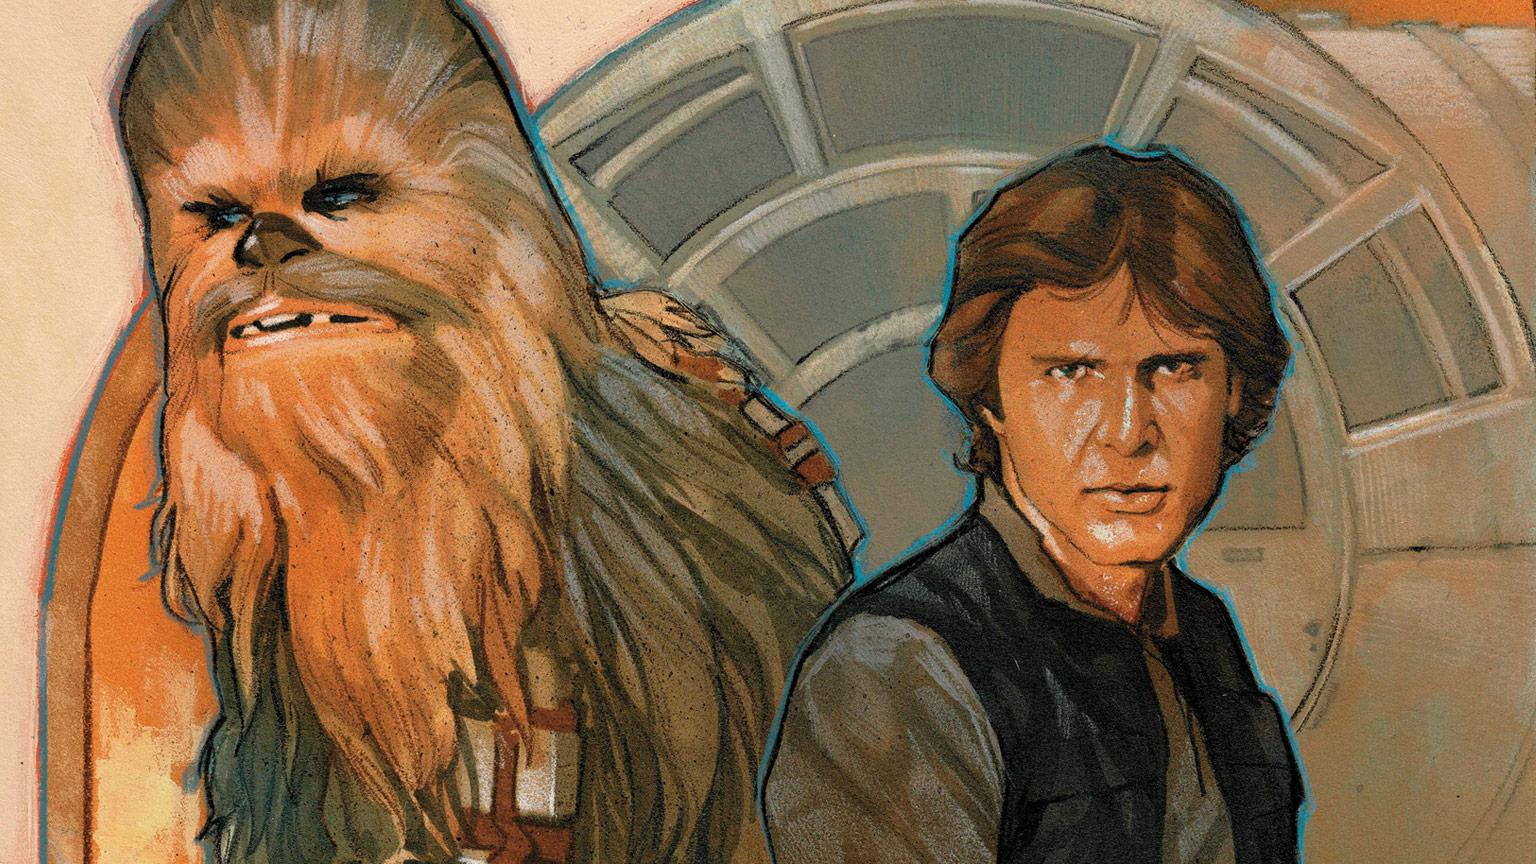 Han Solo & Chewie ‘Star Wars’ Return Is ‘A Hundred Dreams Come True’